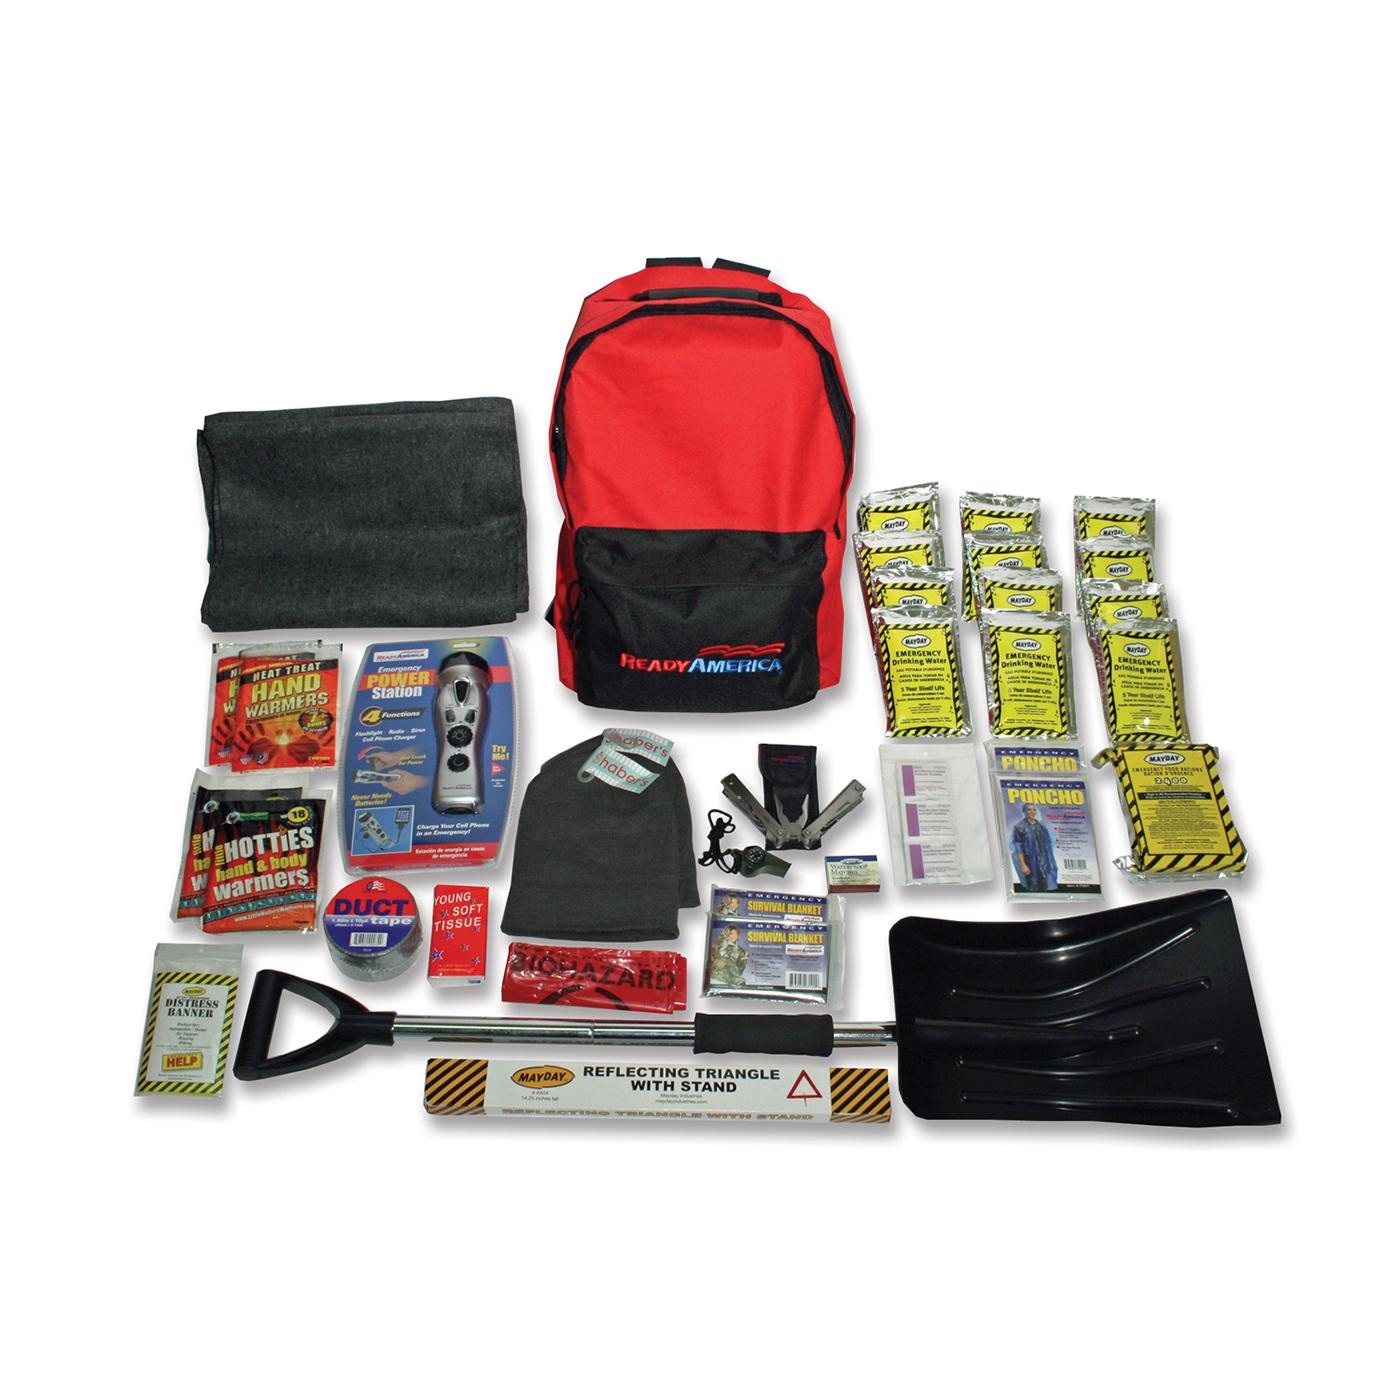 Ready America 4-Person 3-Day Deluxe Emergency Kit with Backpack